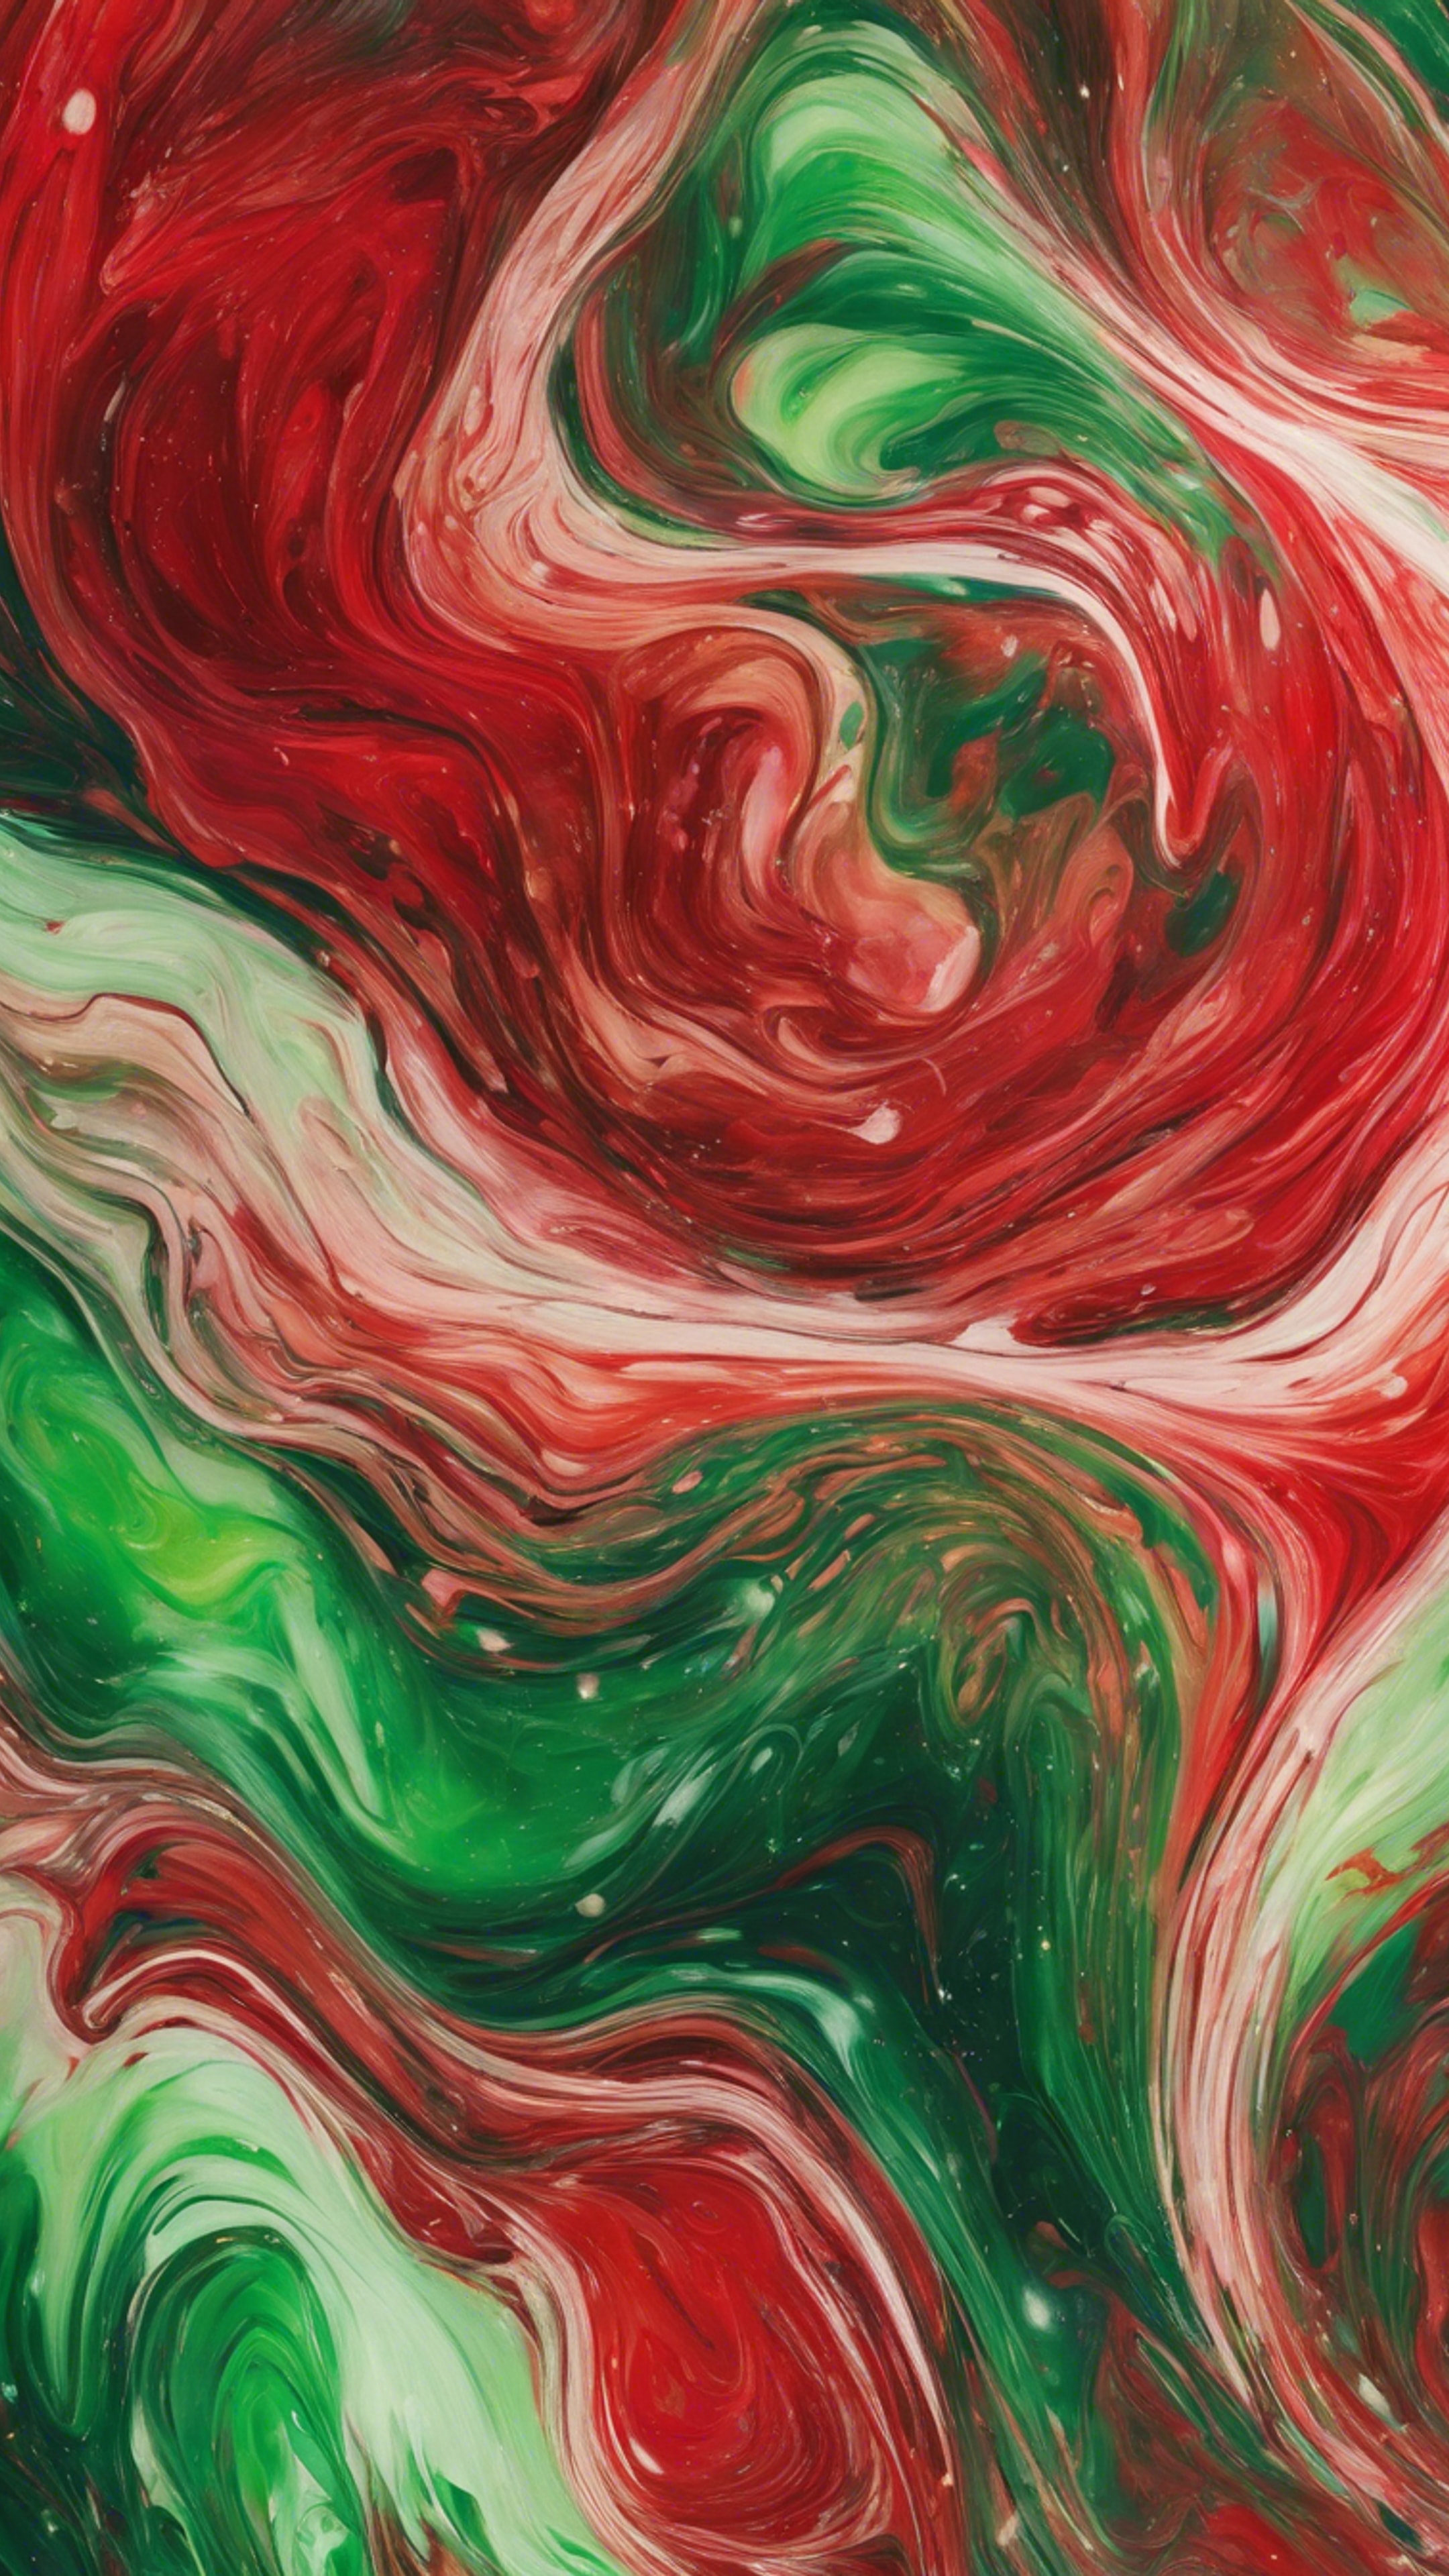 A vivid painting of swirling red and green abstract patterns 벽지[5978fc4bccef4bcc8a58]